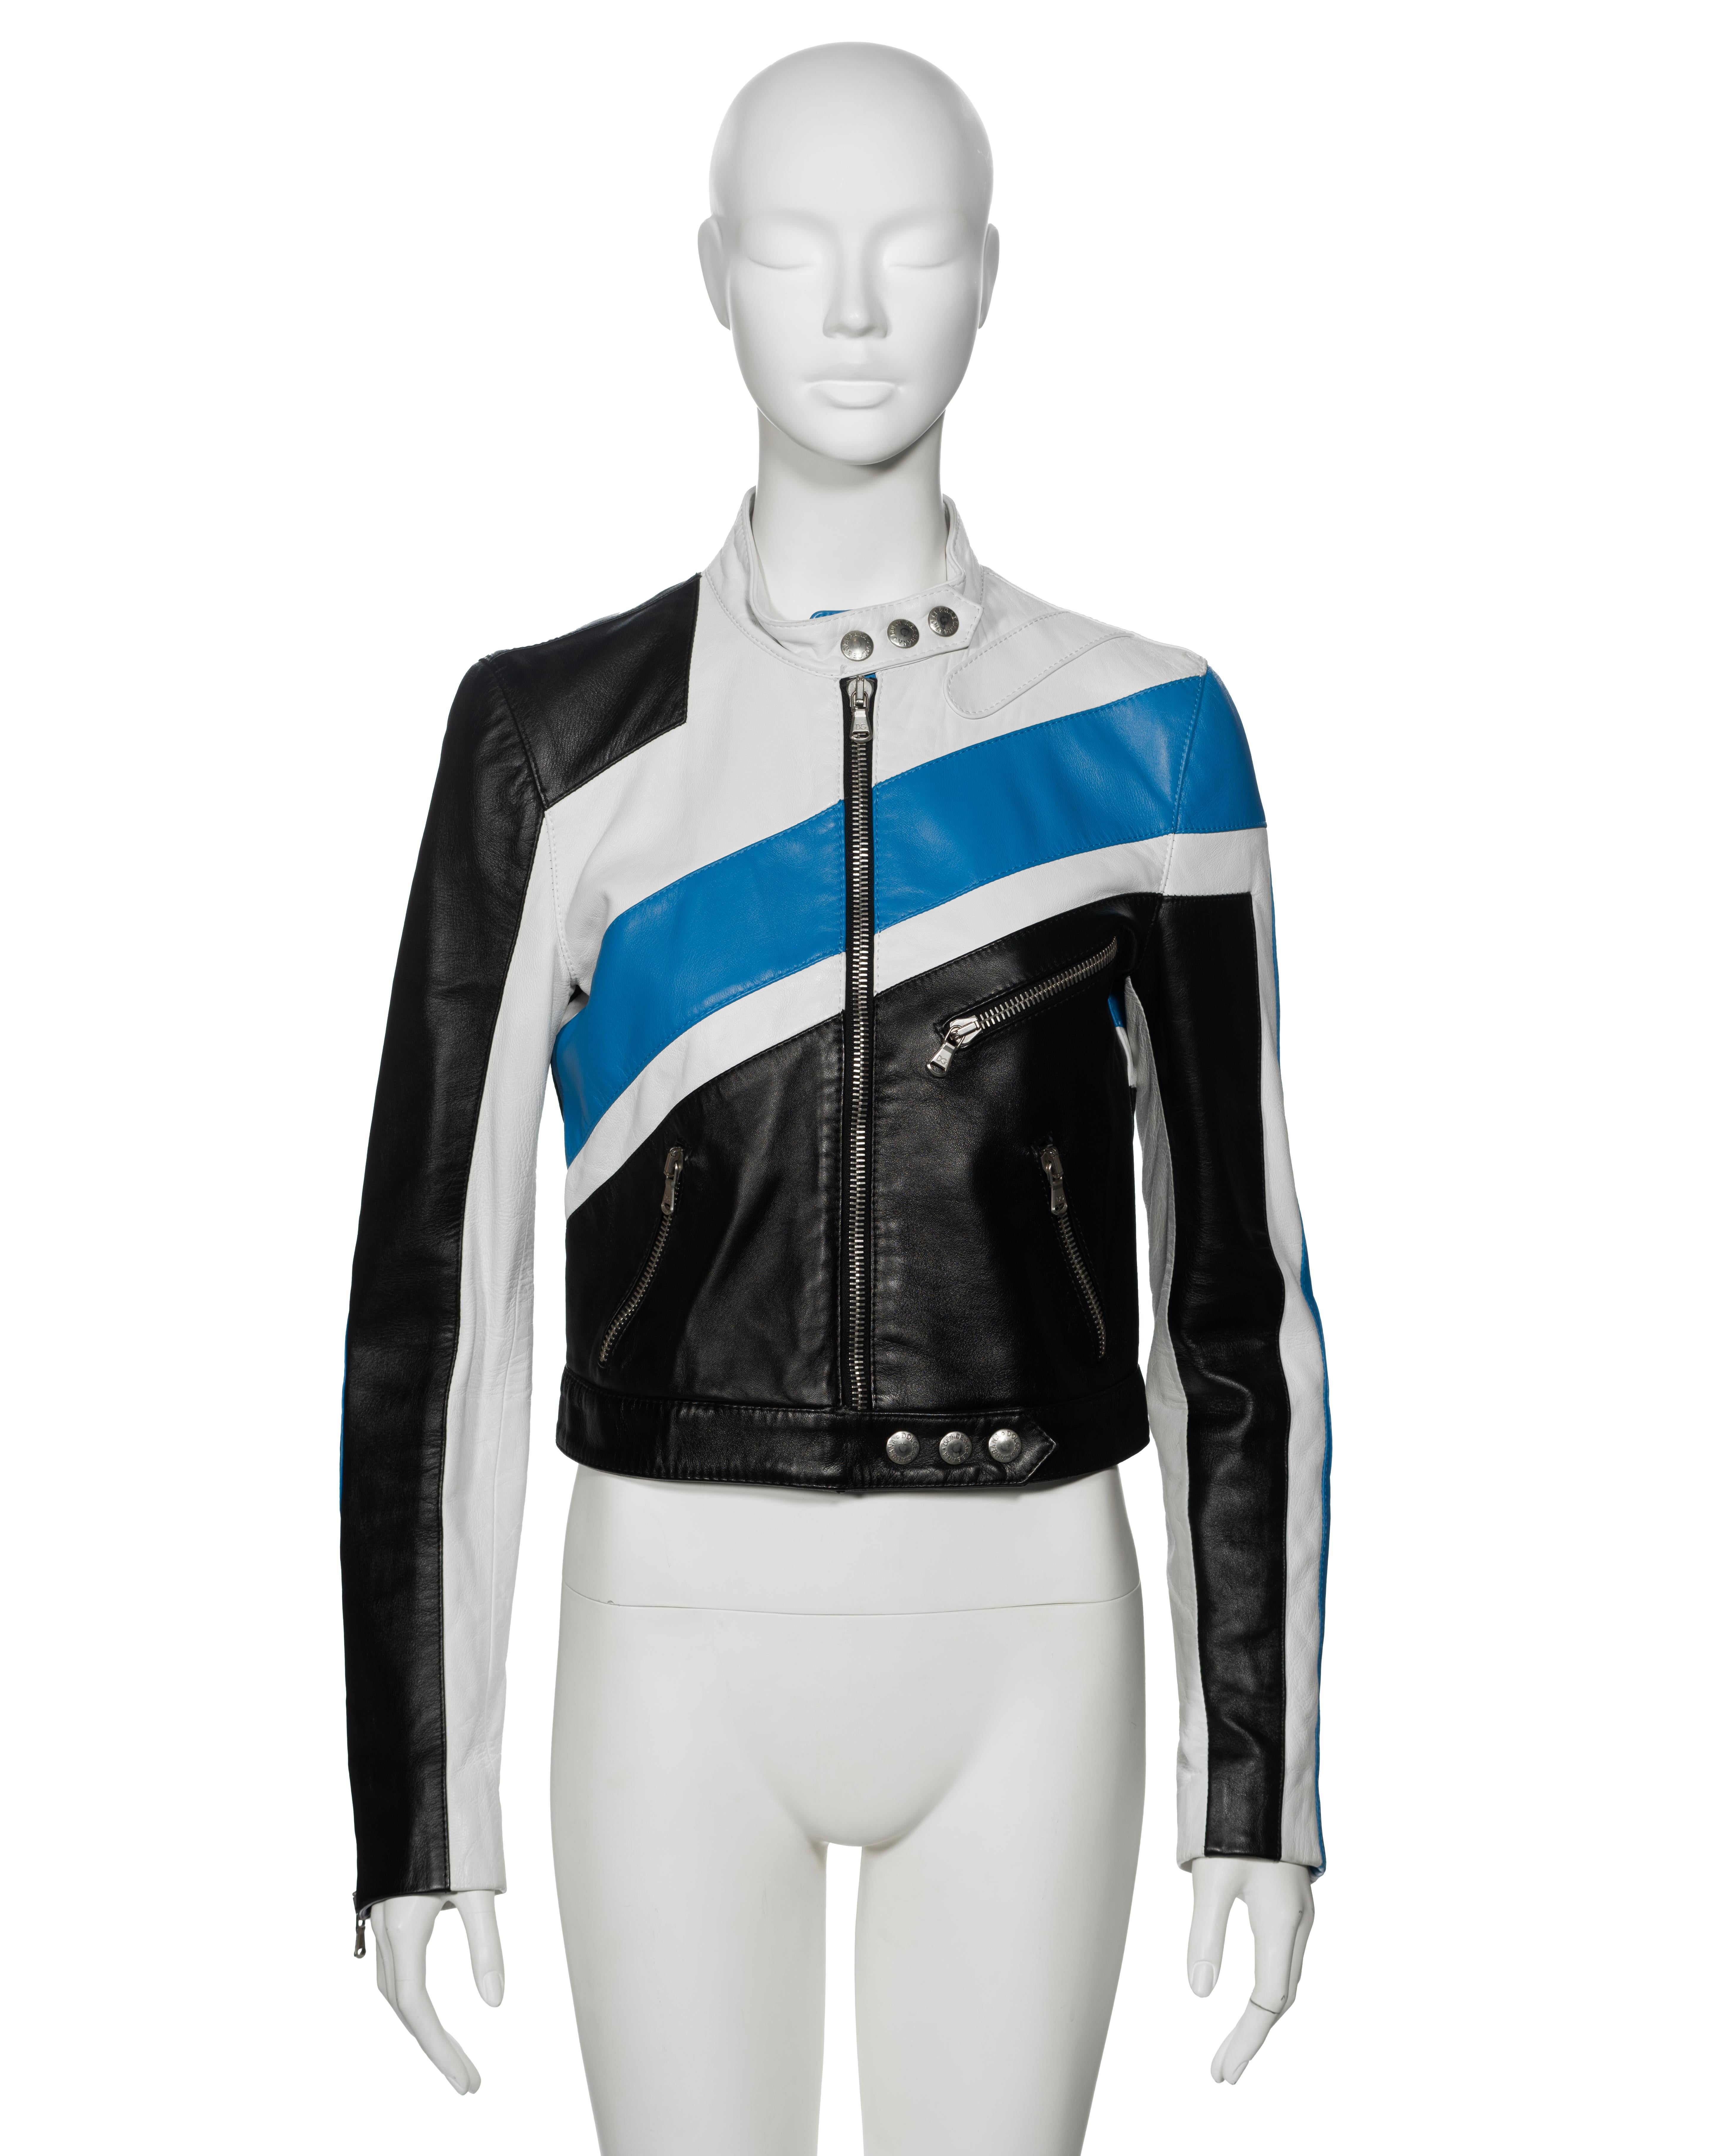 ▪ Archival Dolce & Gabbana Tri-Colour Leather Racer Jacket
▪ Spring-Summer 2001
▪ Sold by One of a Kind Archive
▪ Crafted from multi-panelled leather in a striking combination of blue, black, and white
▪ Boasts a cropped silhouette
▪ Featured